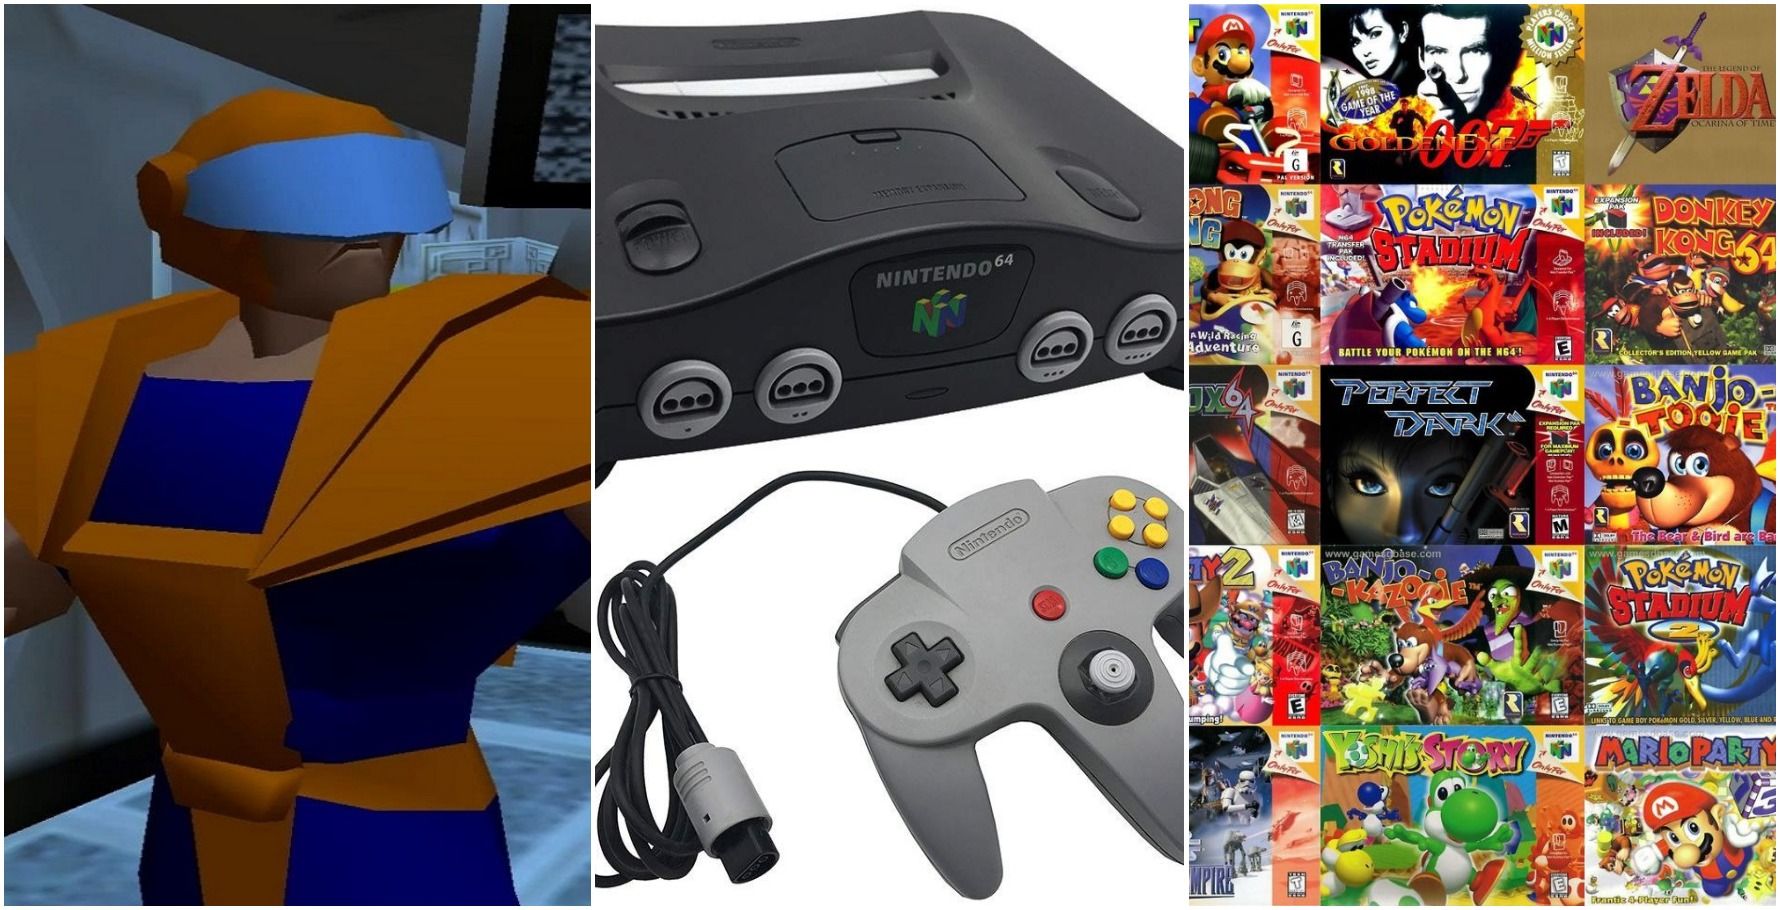 10 N64 Games Played (But Forgot About)